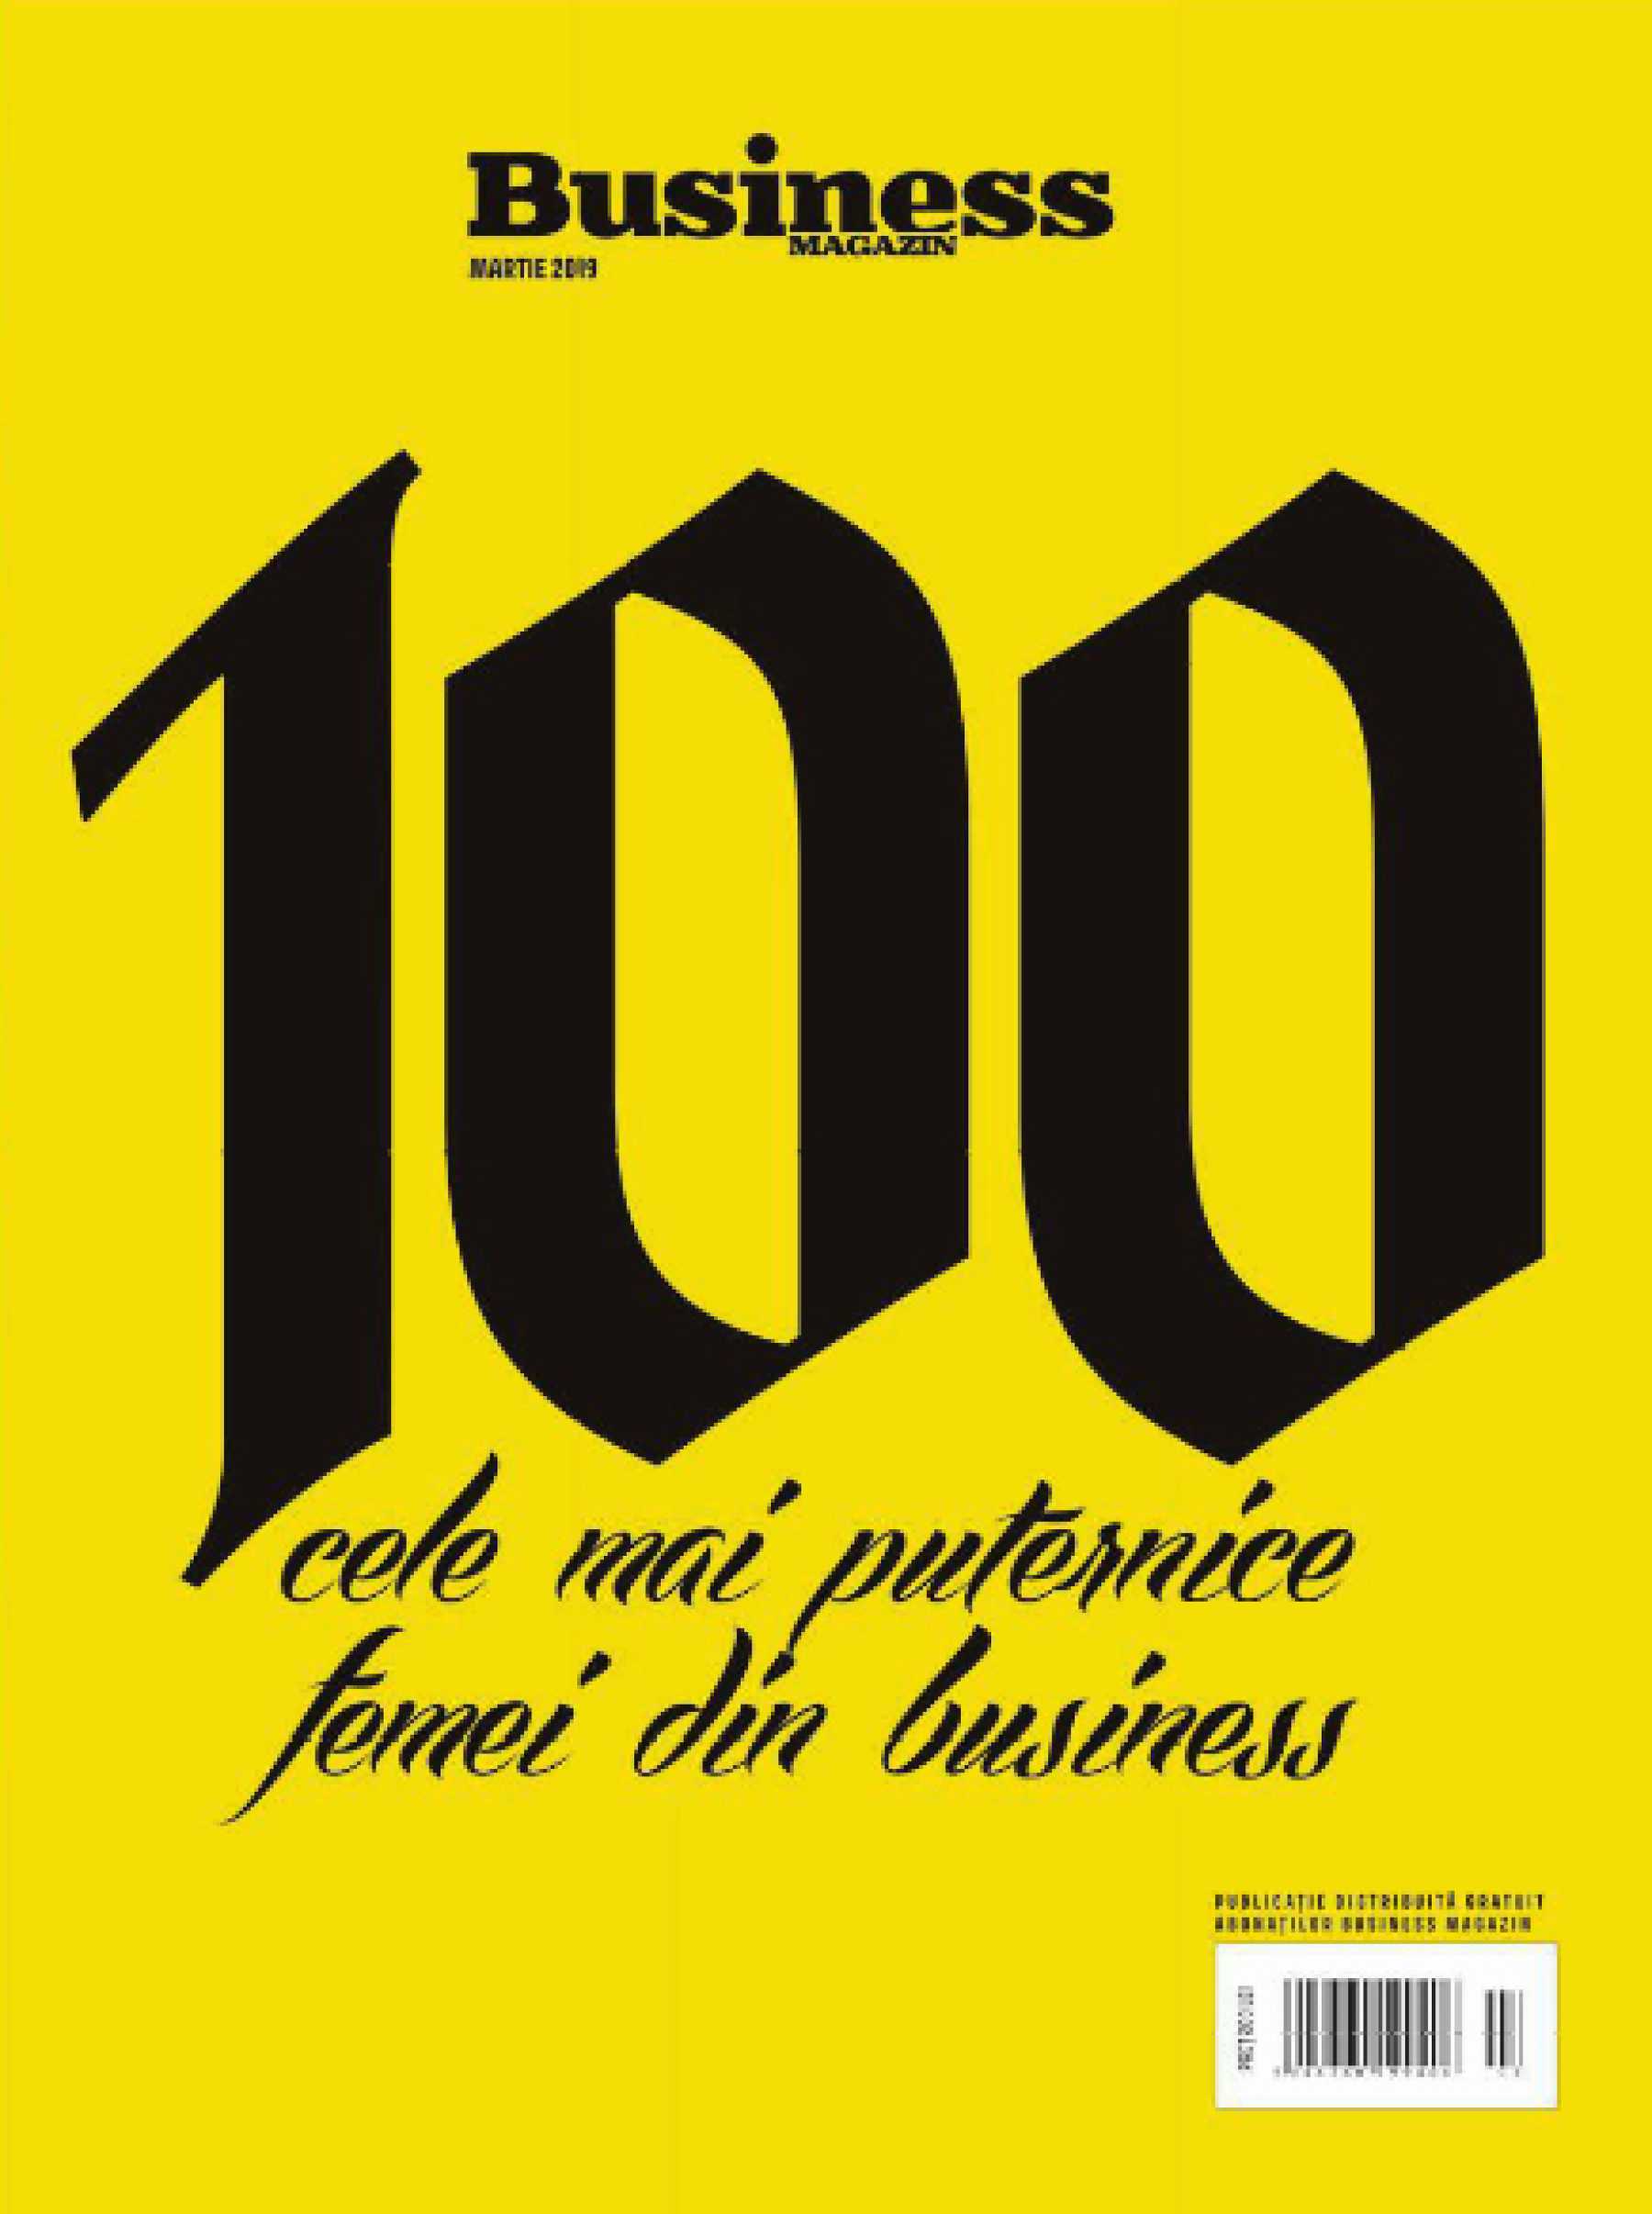 Cristina Căpitanu and Beatrice Dumitrașcu, in Business Magazin 100 most powerful women in business